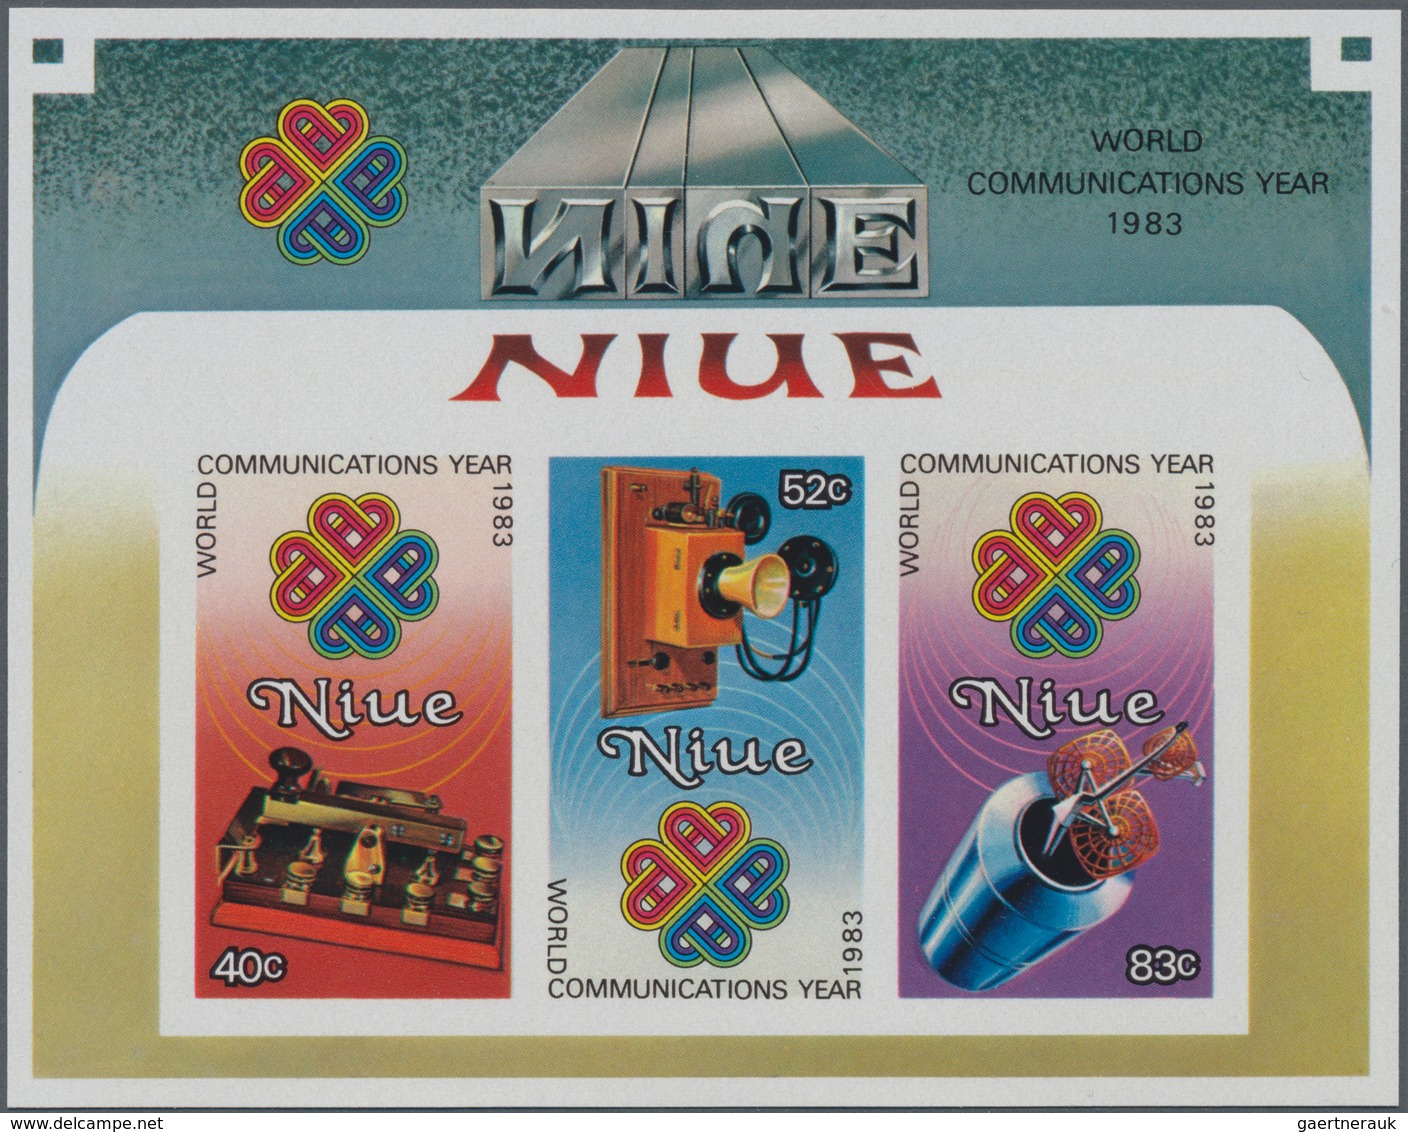 Niue: 1977/1984 (ca.), accumulation with approx. 1.000 IMPERFORATE stamps (with several se-tenant is